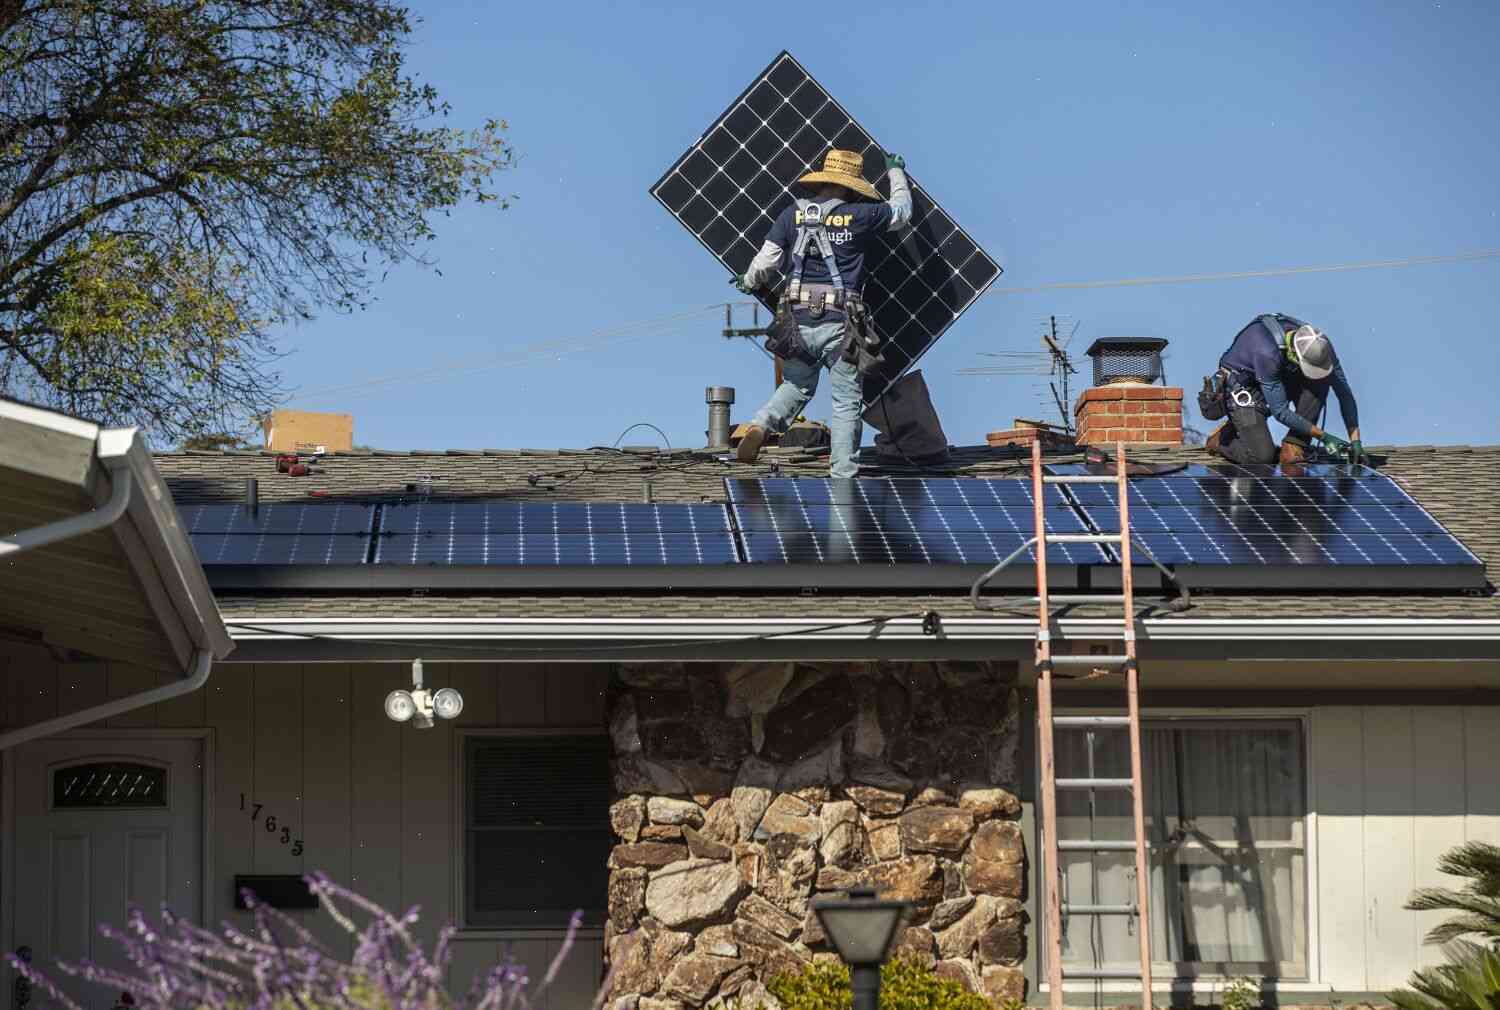 California is putting together a plan to give solar customers a break on their utility bills